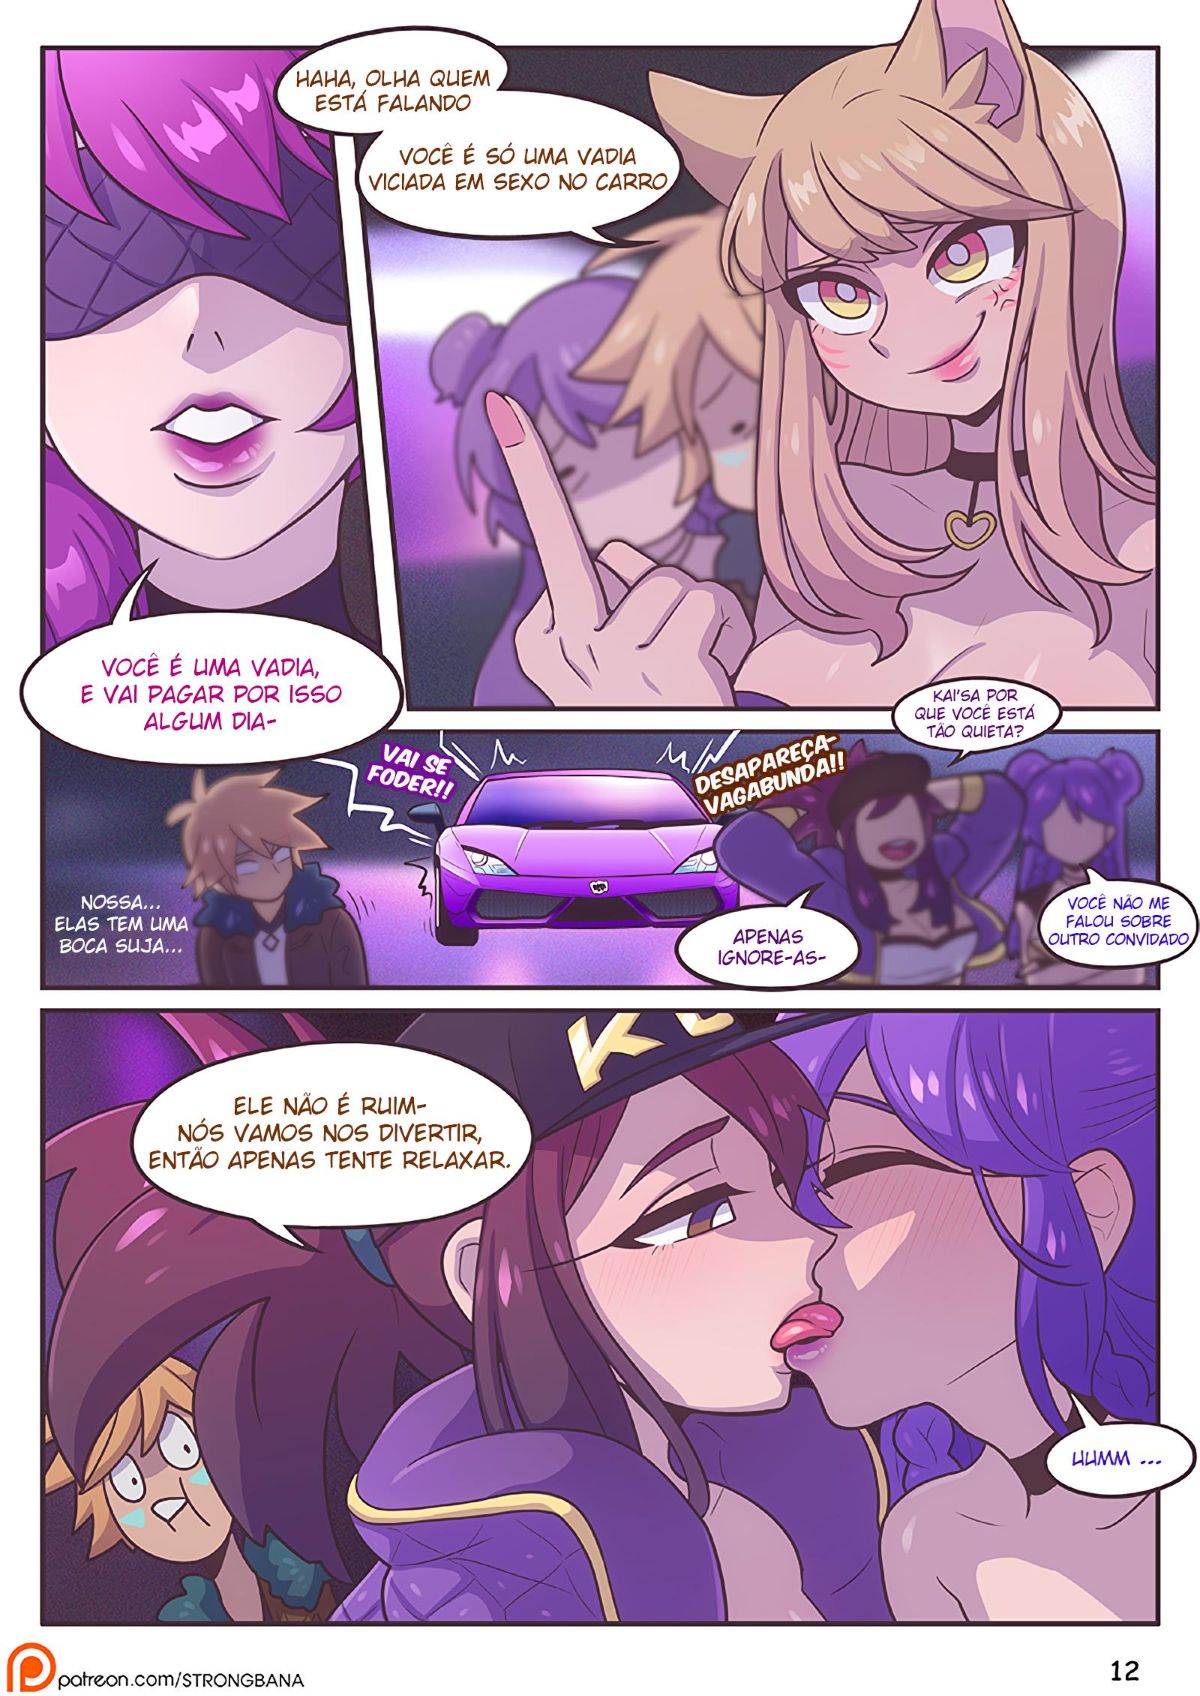 After Party (LOL) Hentai pt-br 14